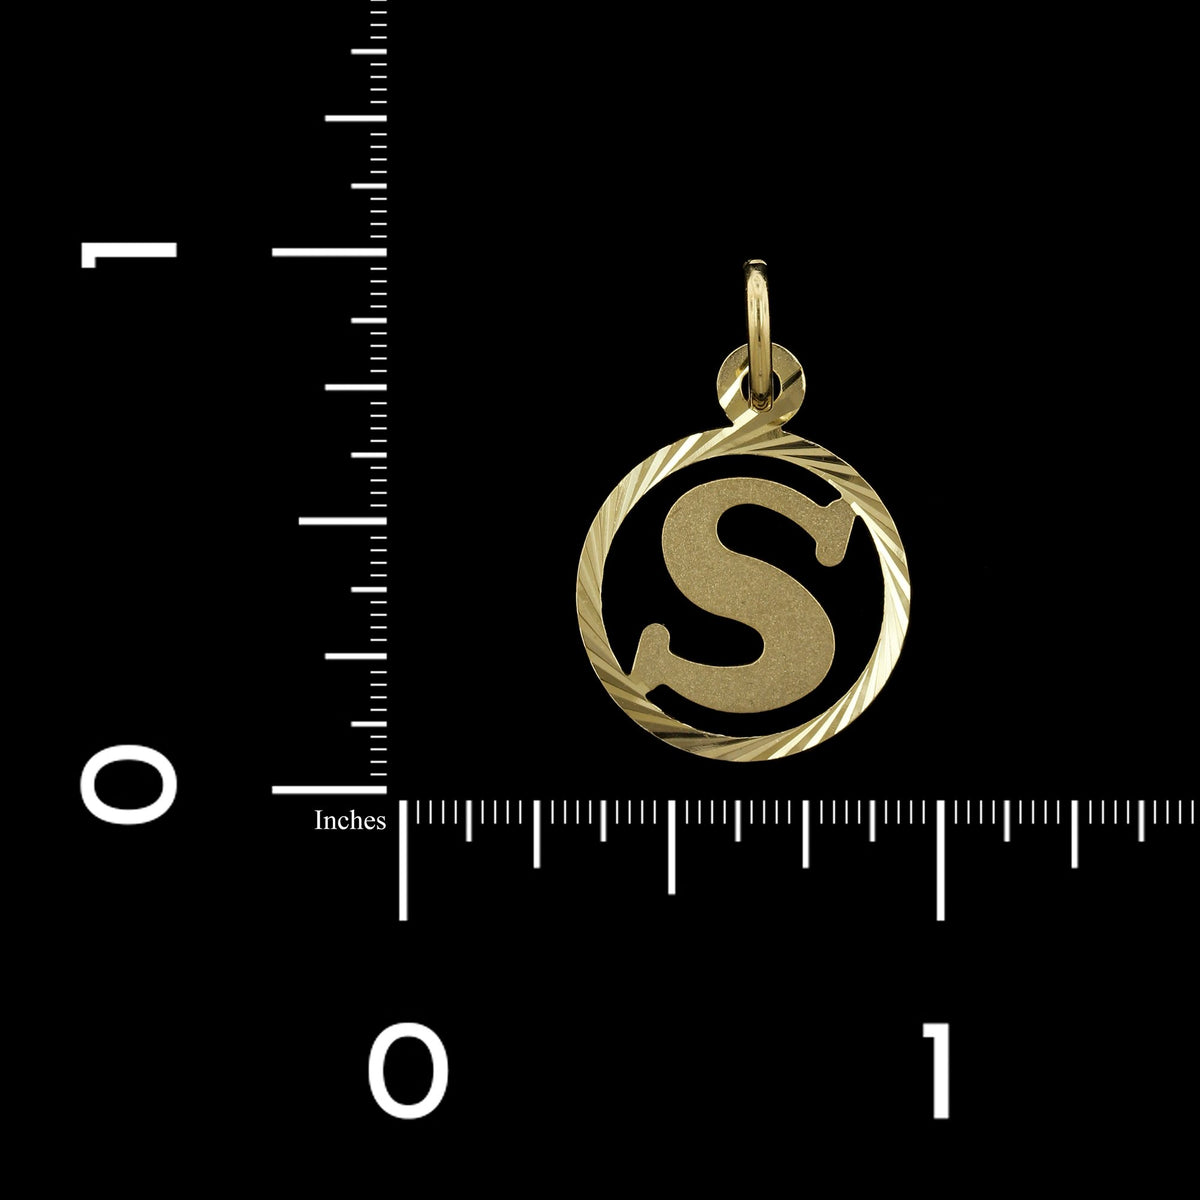 18K Yellow Gold Estate S Initial Charm